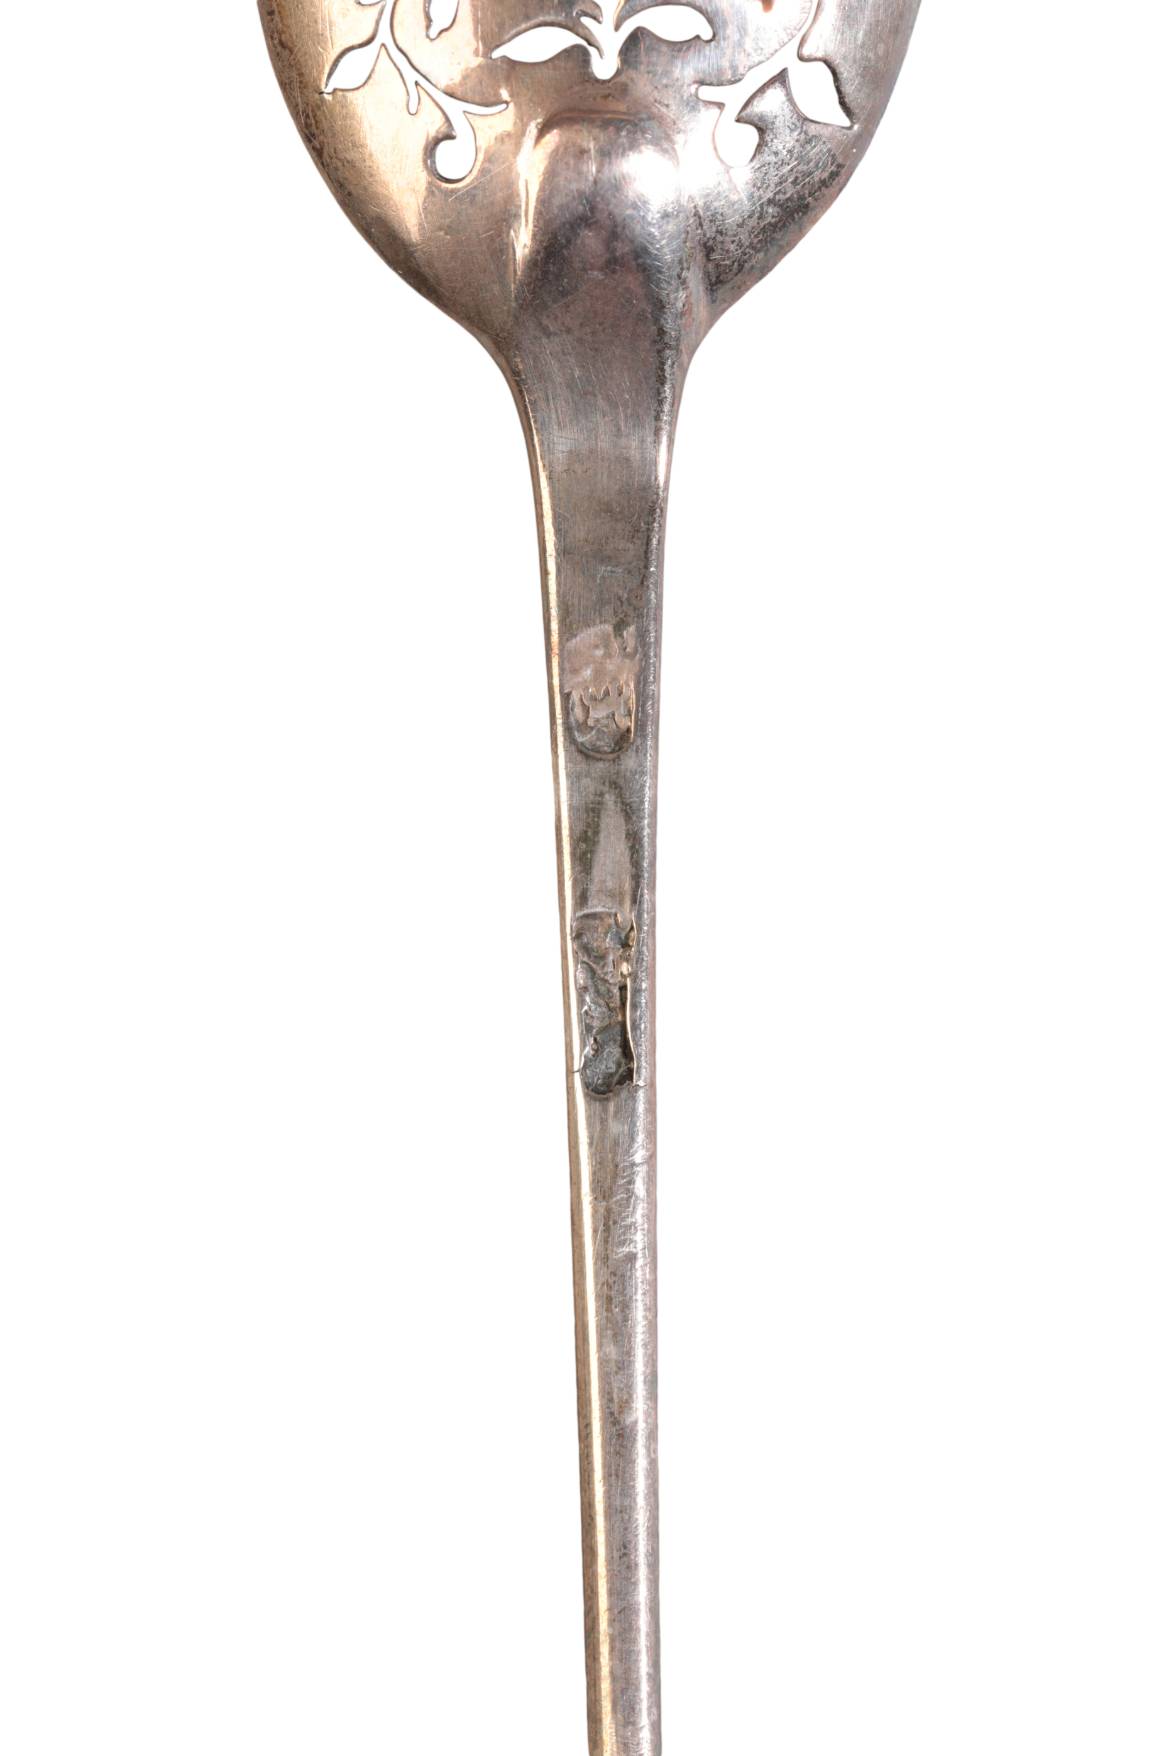 A GEORGE III SILVER MOTE SPOON - Image 3 of 3